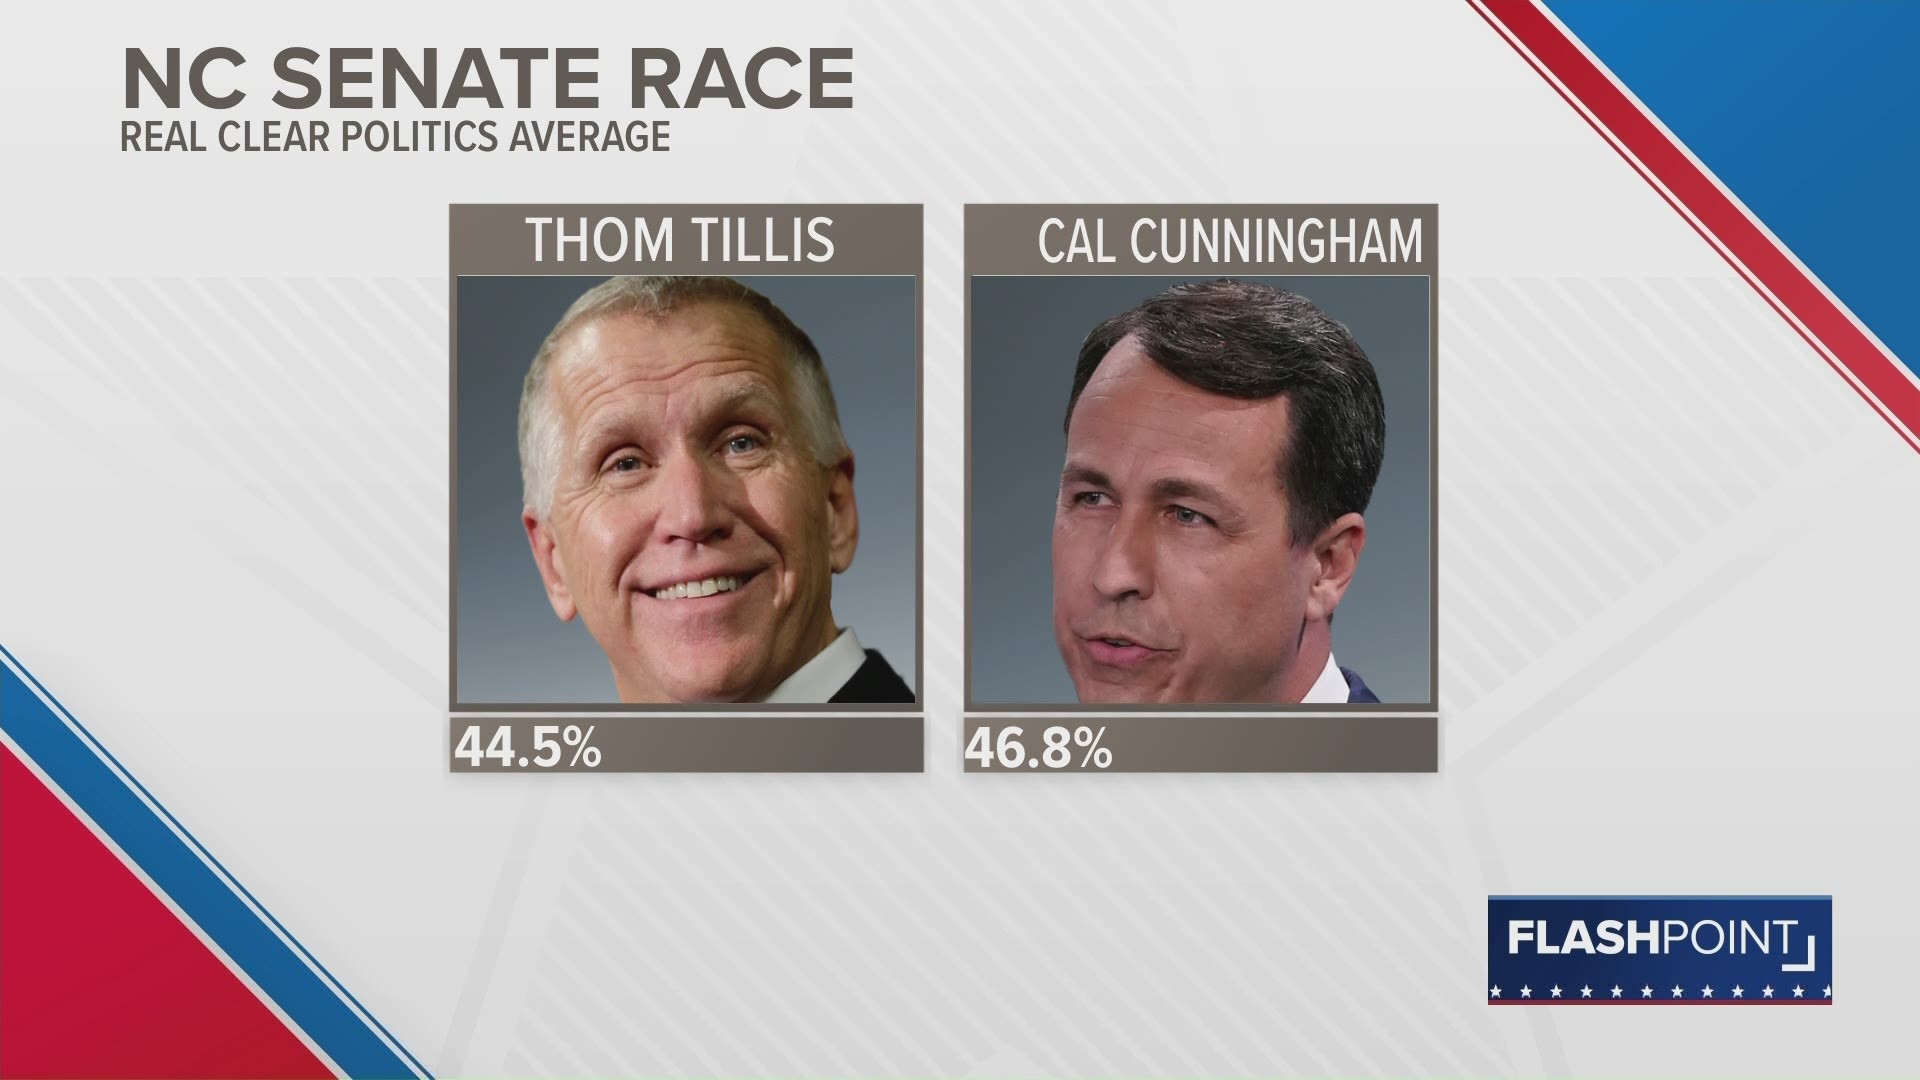 Flashpoint 10/25: Cal Cunningham 10 point lead a week ago, now leads only 2 points over Thom Tillis.